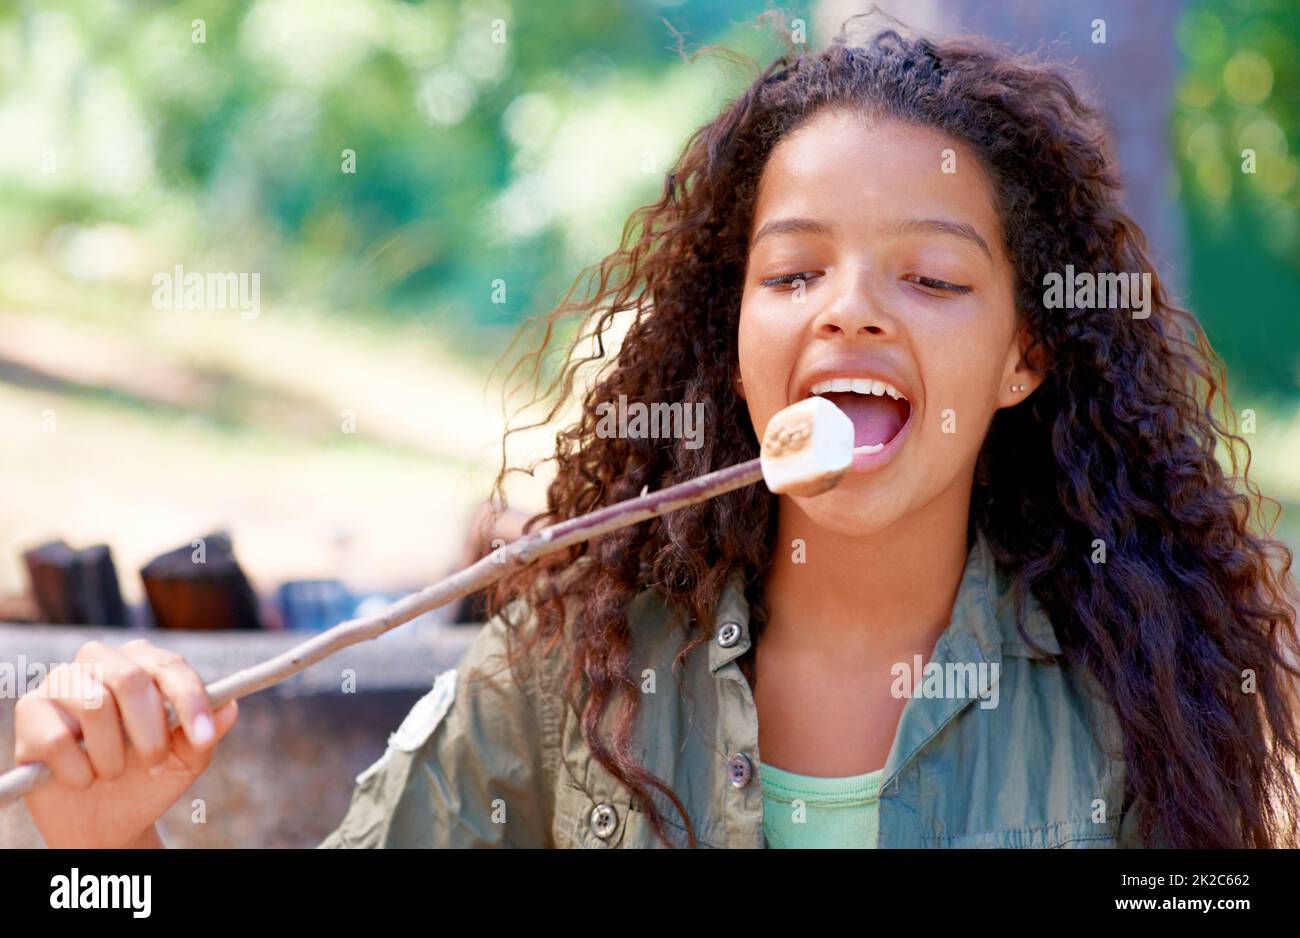 Biting into deliciousness. A young girl biting a fireside treat. Stock Photo